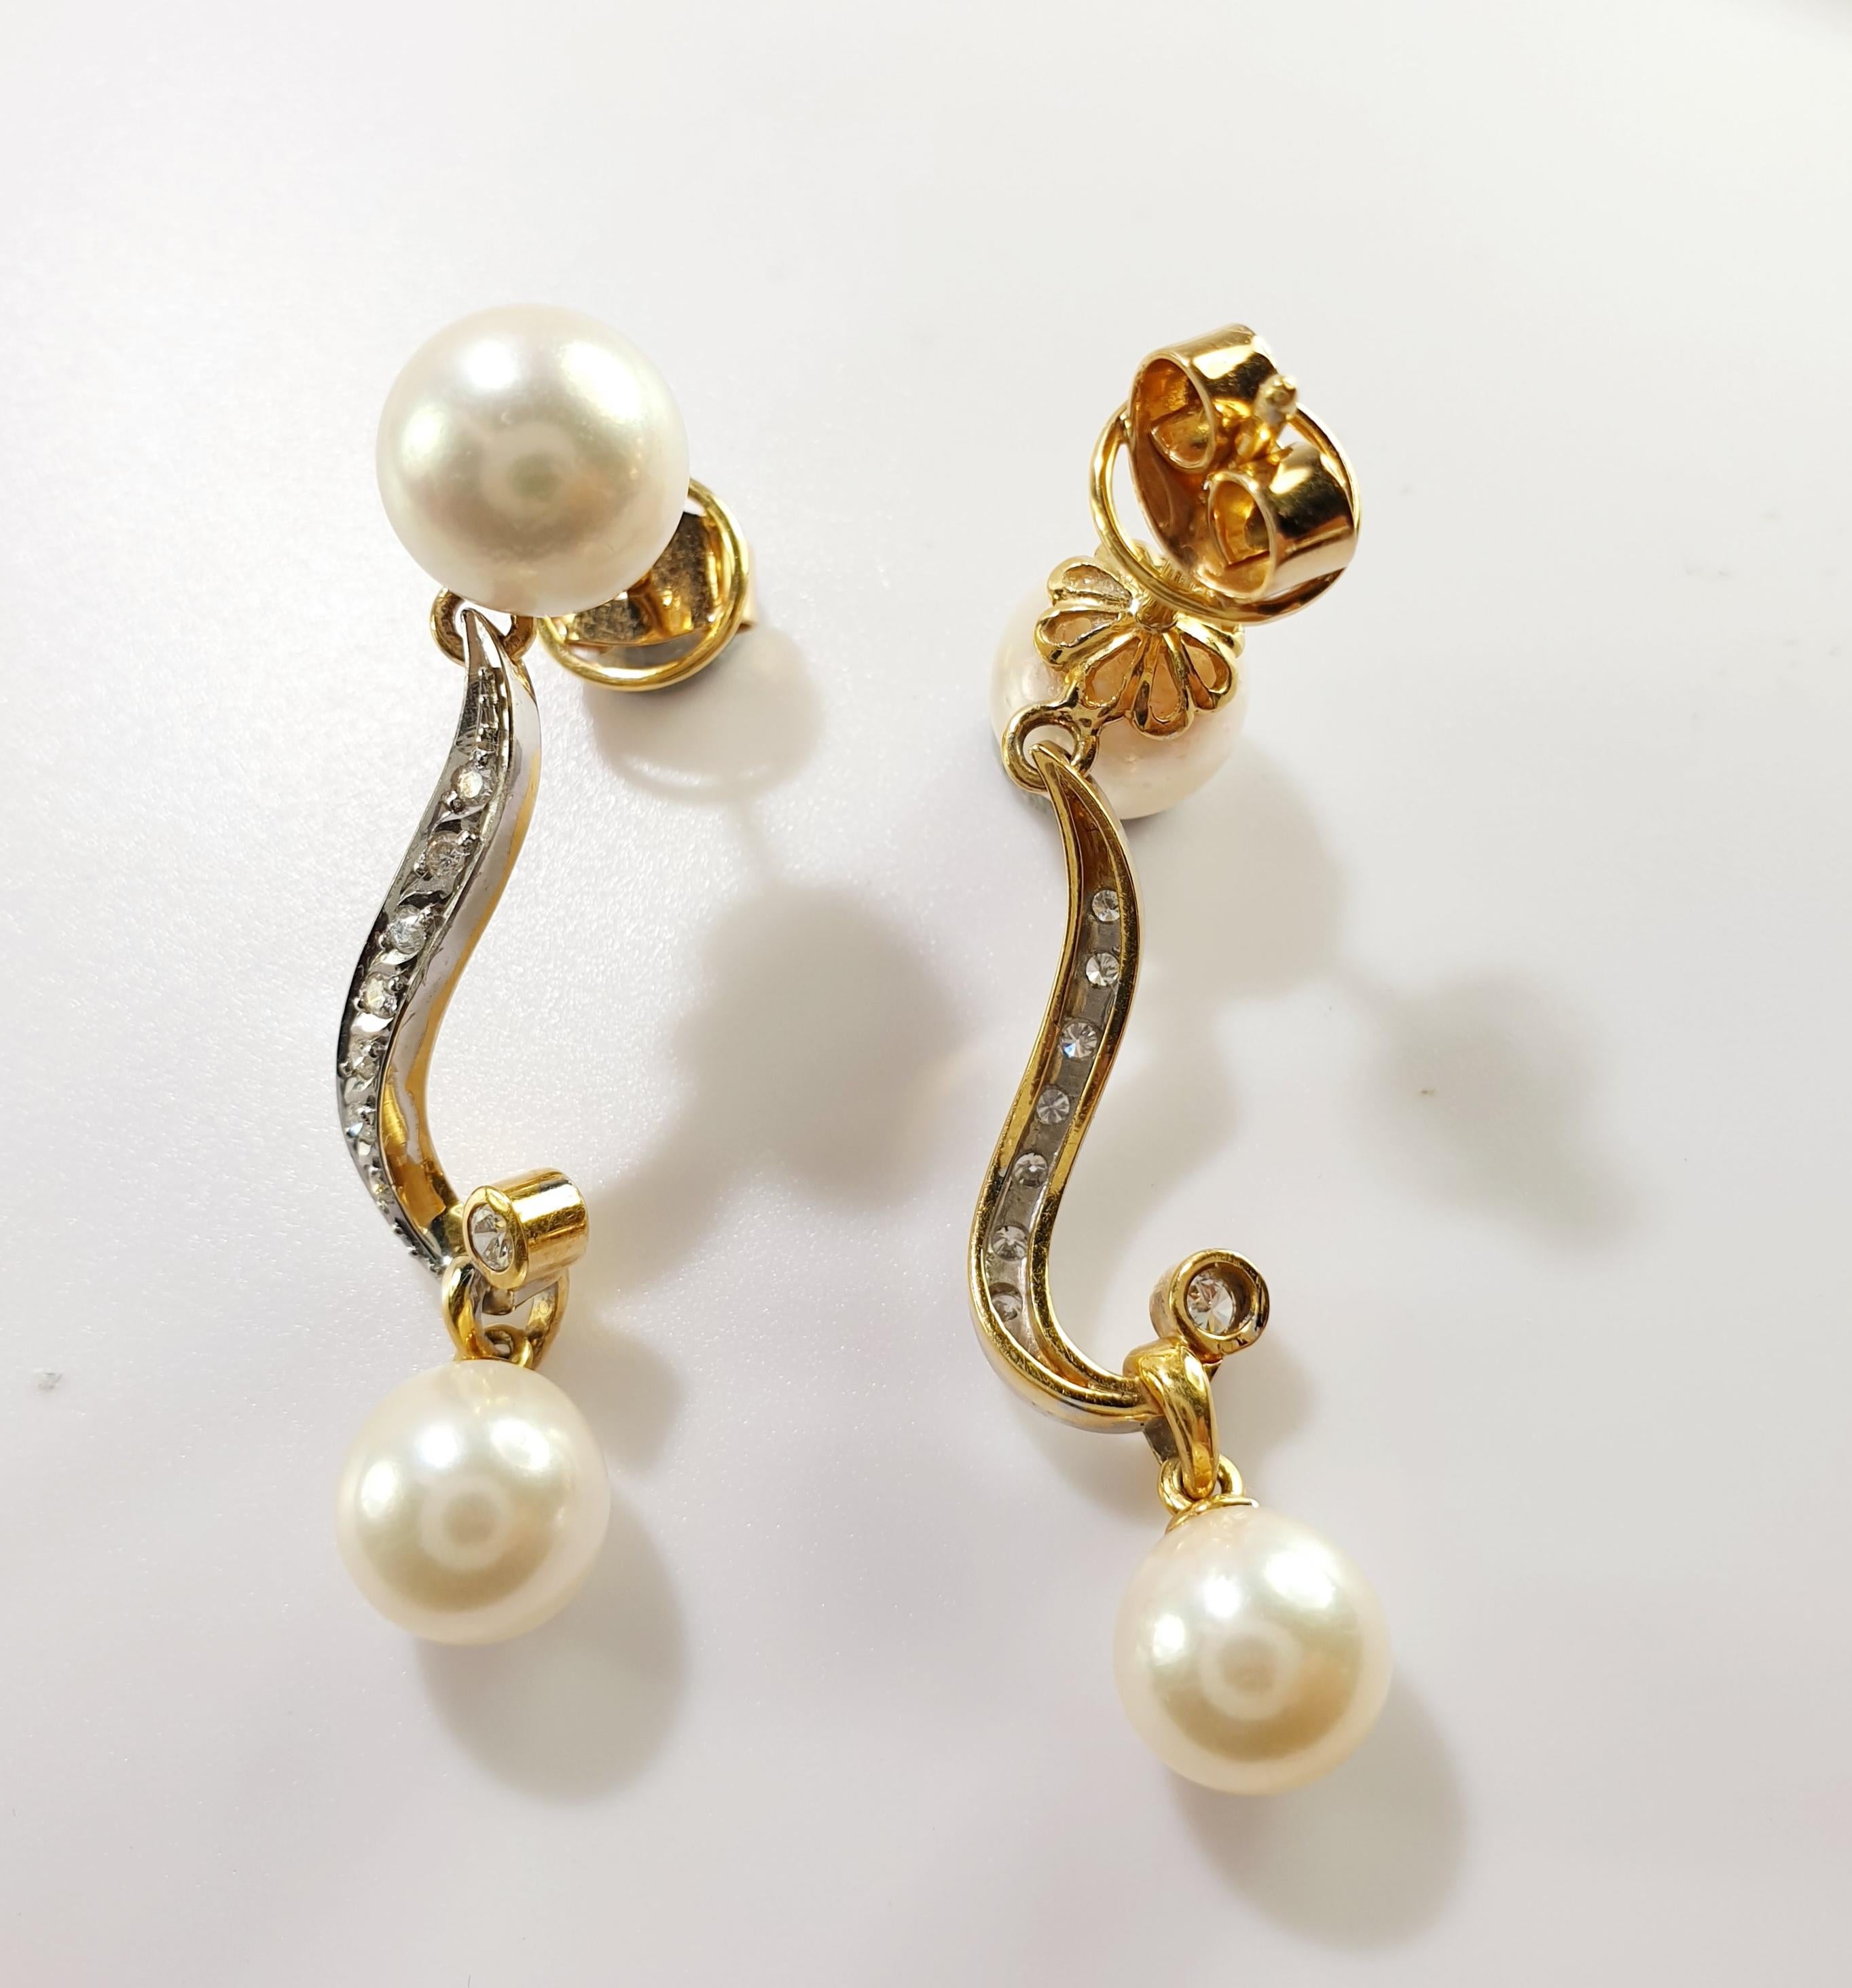 Musical notes Dangle cultivated Pearl earrings in 18k  gold and diamonds 
Head pearls 9mm and base 8mm/0,31inches
Length 40mm  /2,36 inches 

READY TO SHIP
*Shipment of this piece is not affected by COVID-19. Orders welcome!*
STONES
◘ Fair trade,